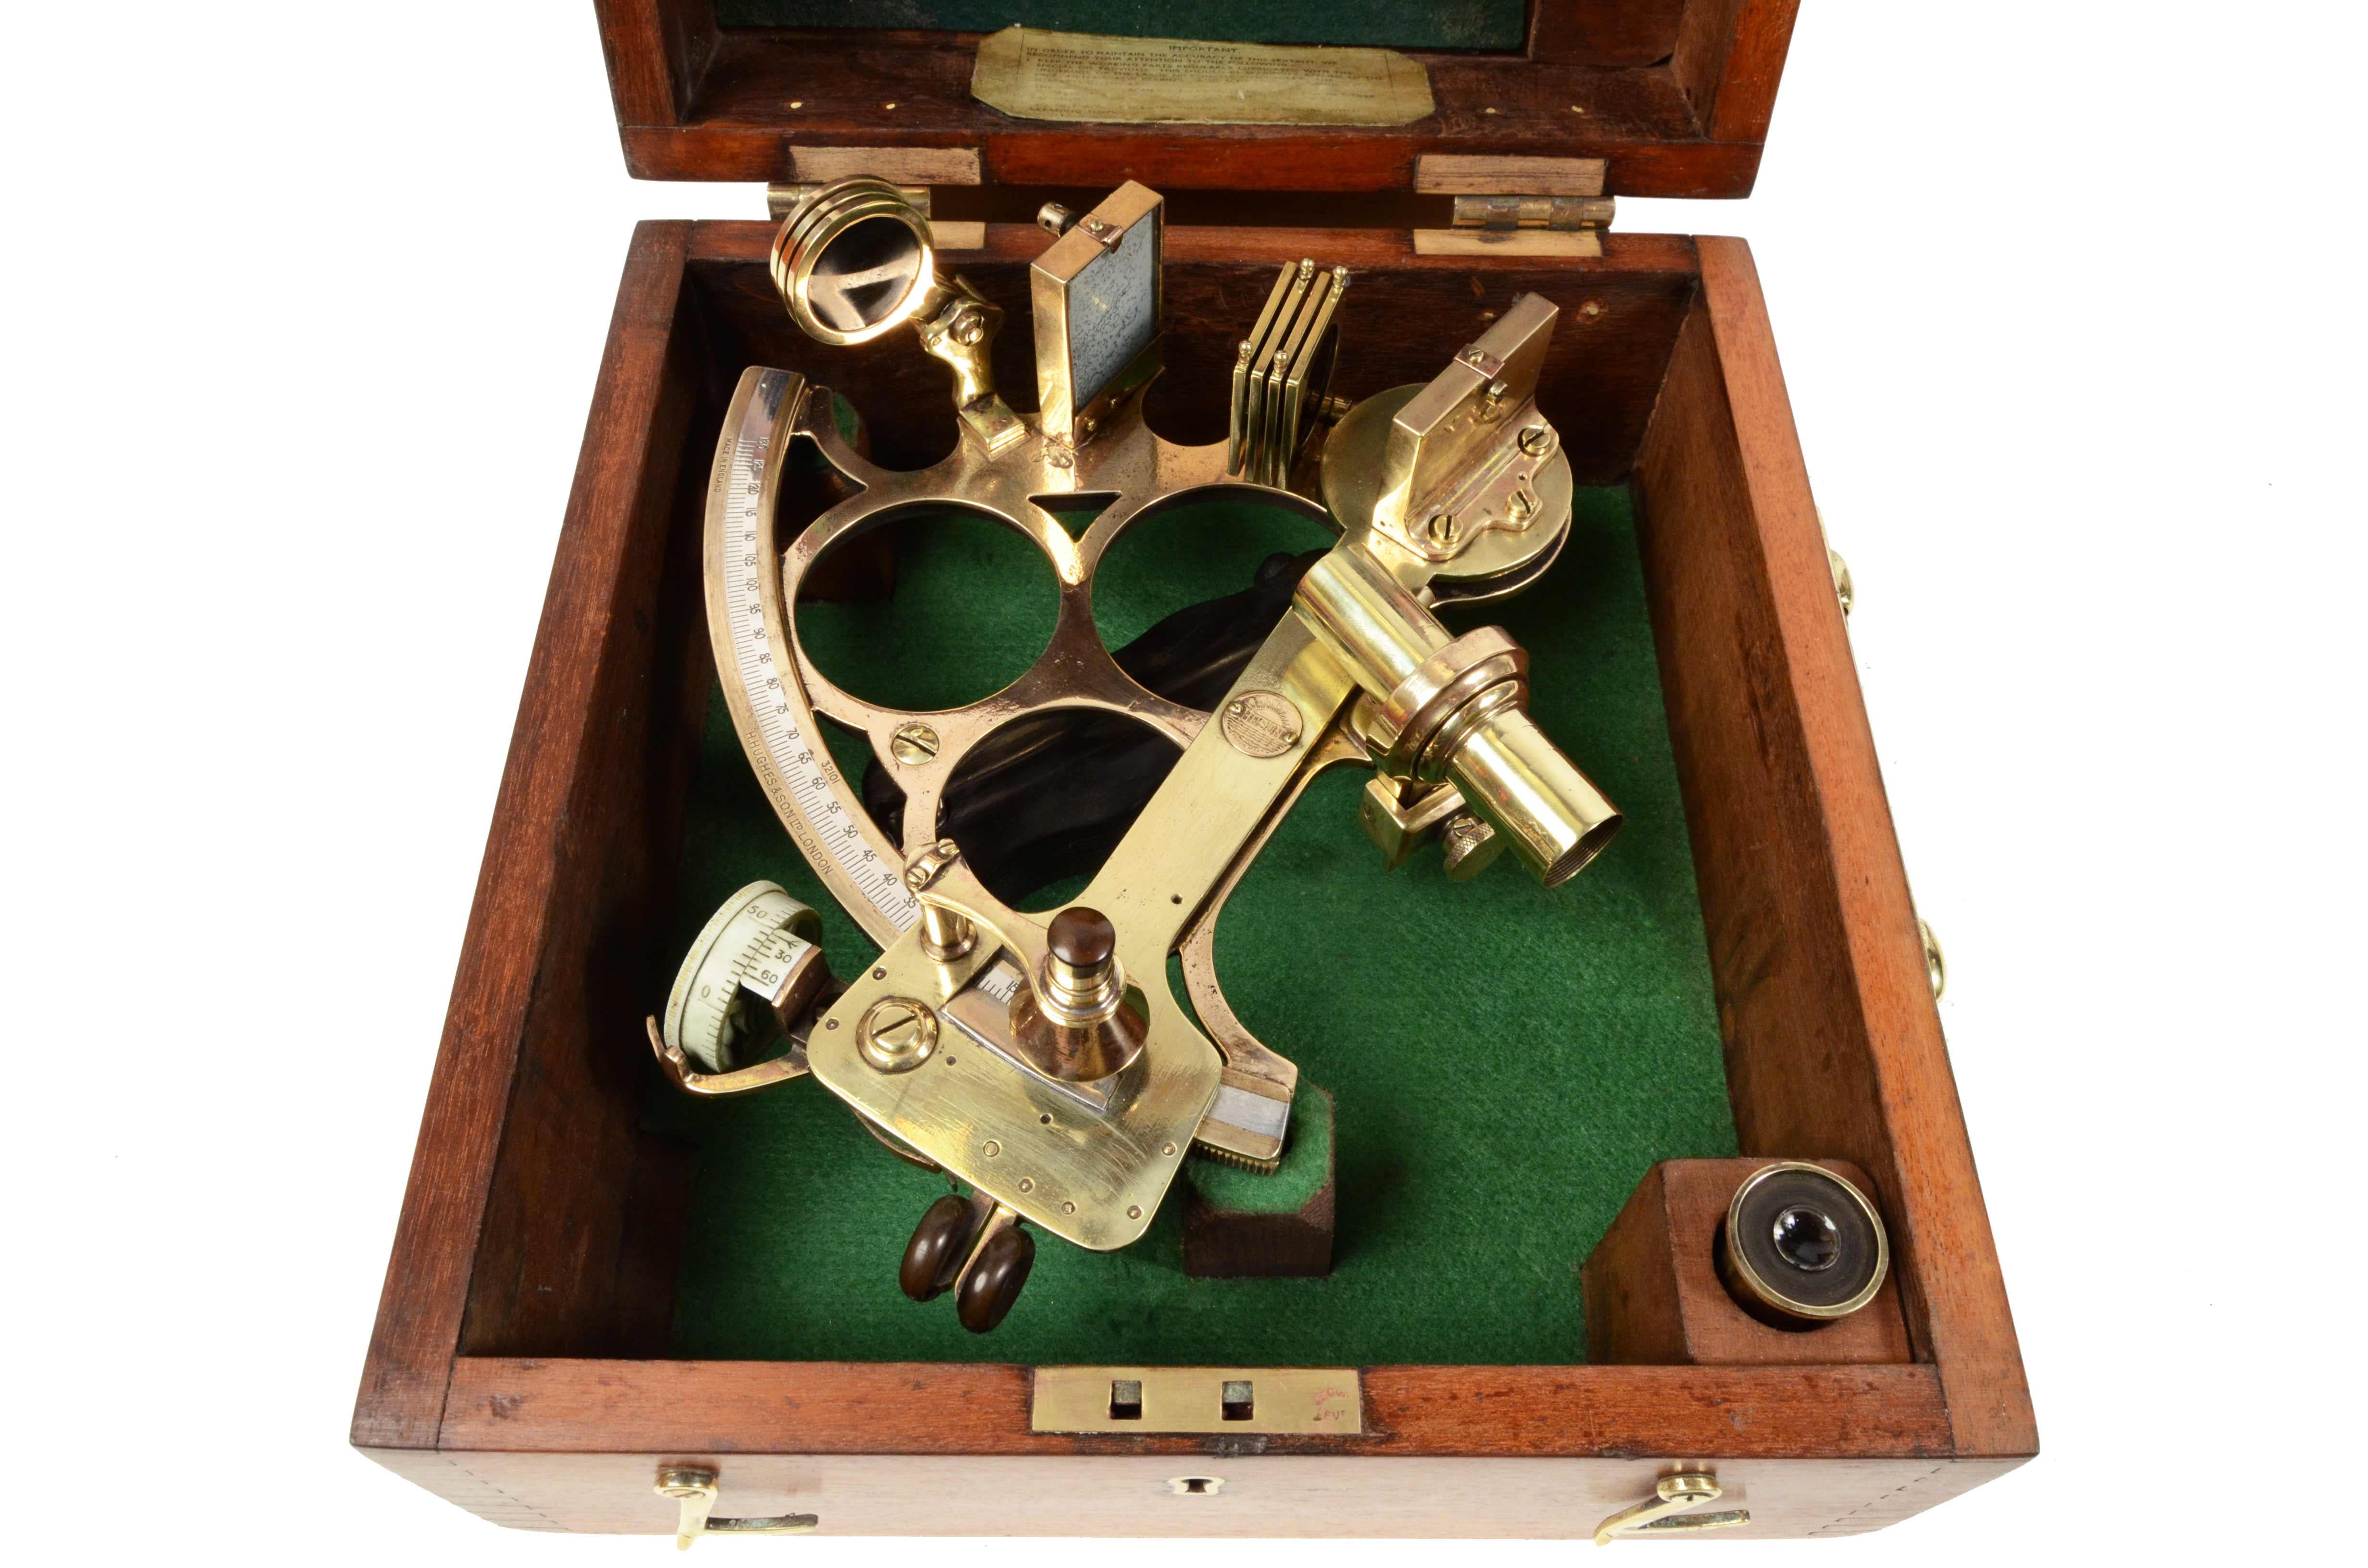 1930s Brass sextant signed Husun Trade Mark and made by H. Hughes & Son Ltd, a company active for about 250 years and specialized in the production of nautical instruments; instrument complete with optics and placed in an elegant original square